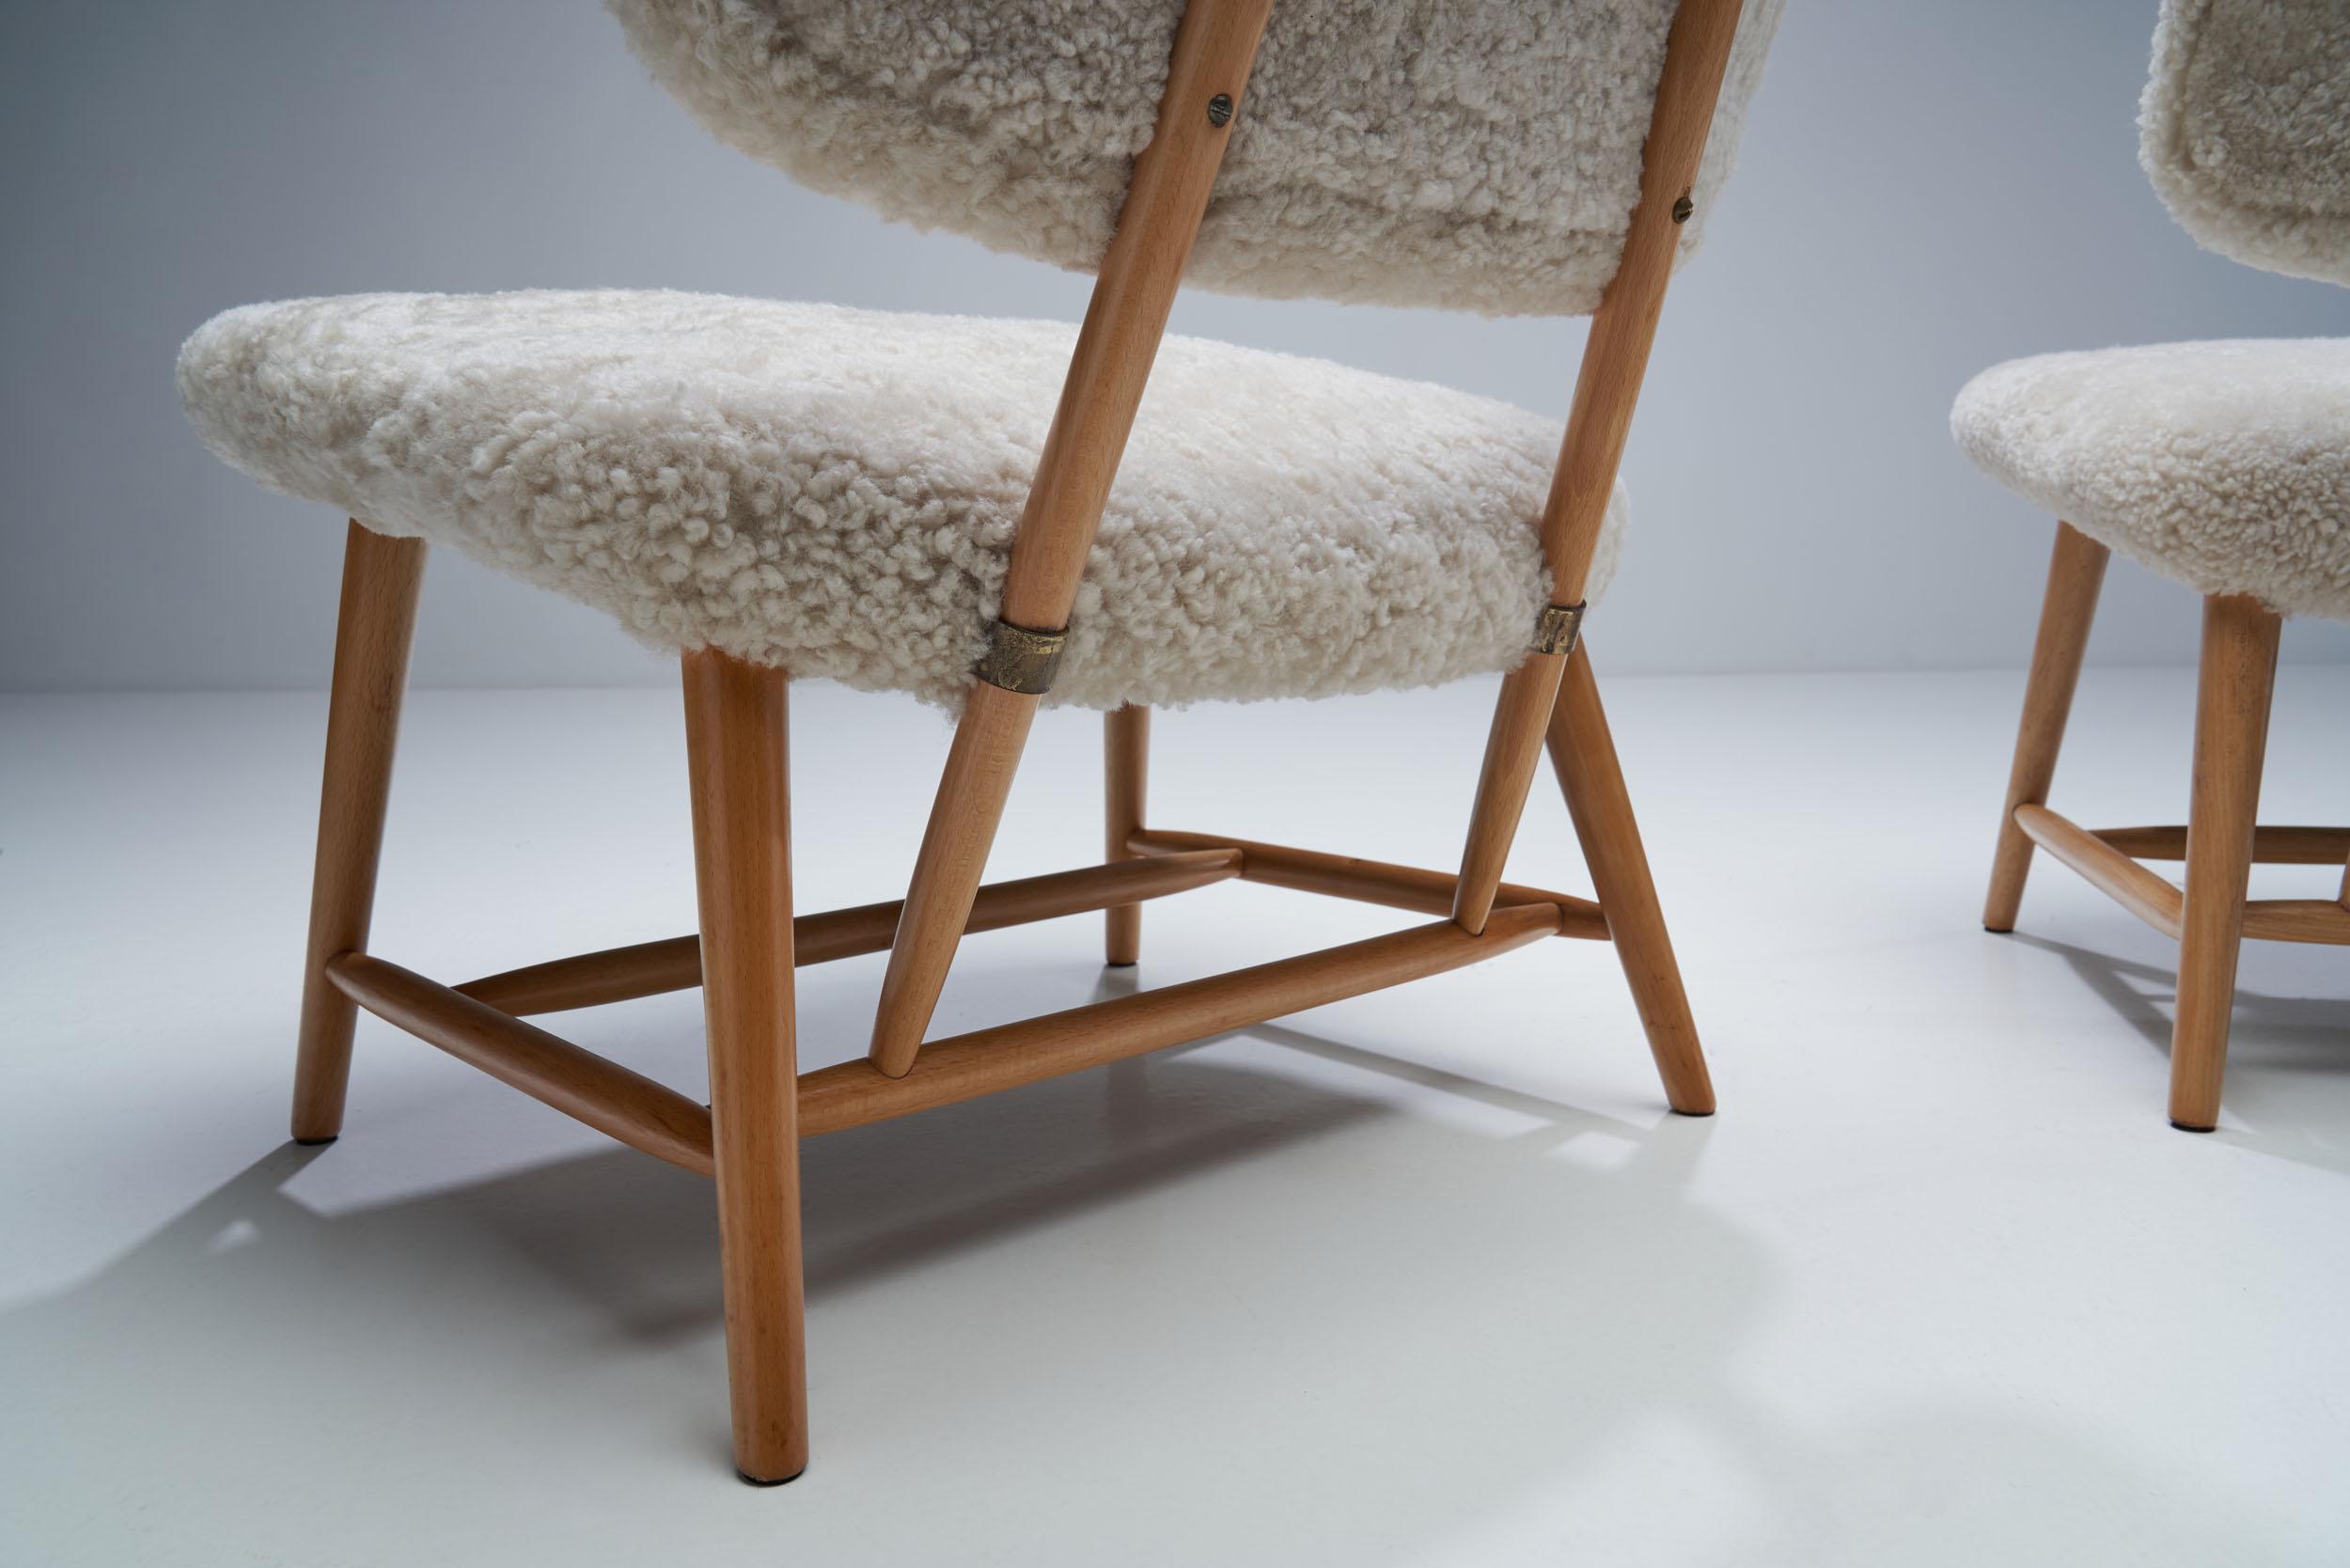 Pair of “TeVe” Chairs by Alf Svensson for Studio Ljungs Industrier AB, SWE 1